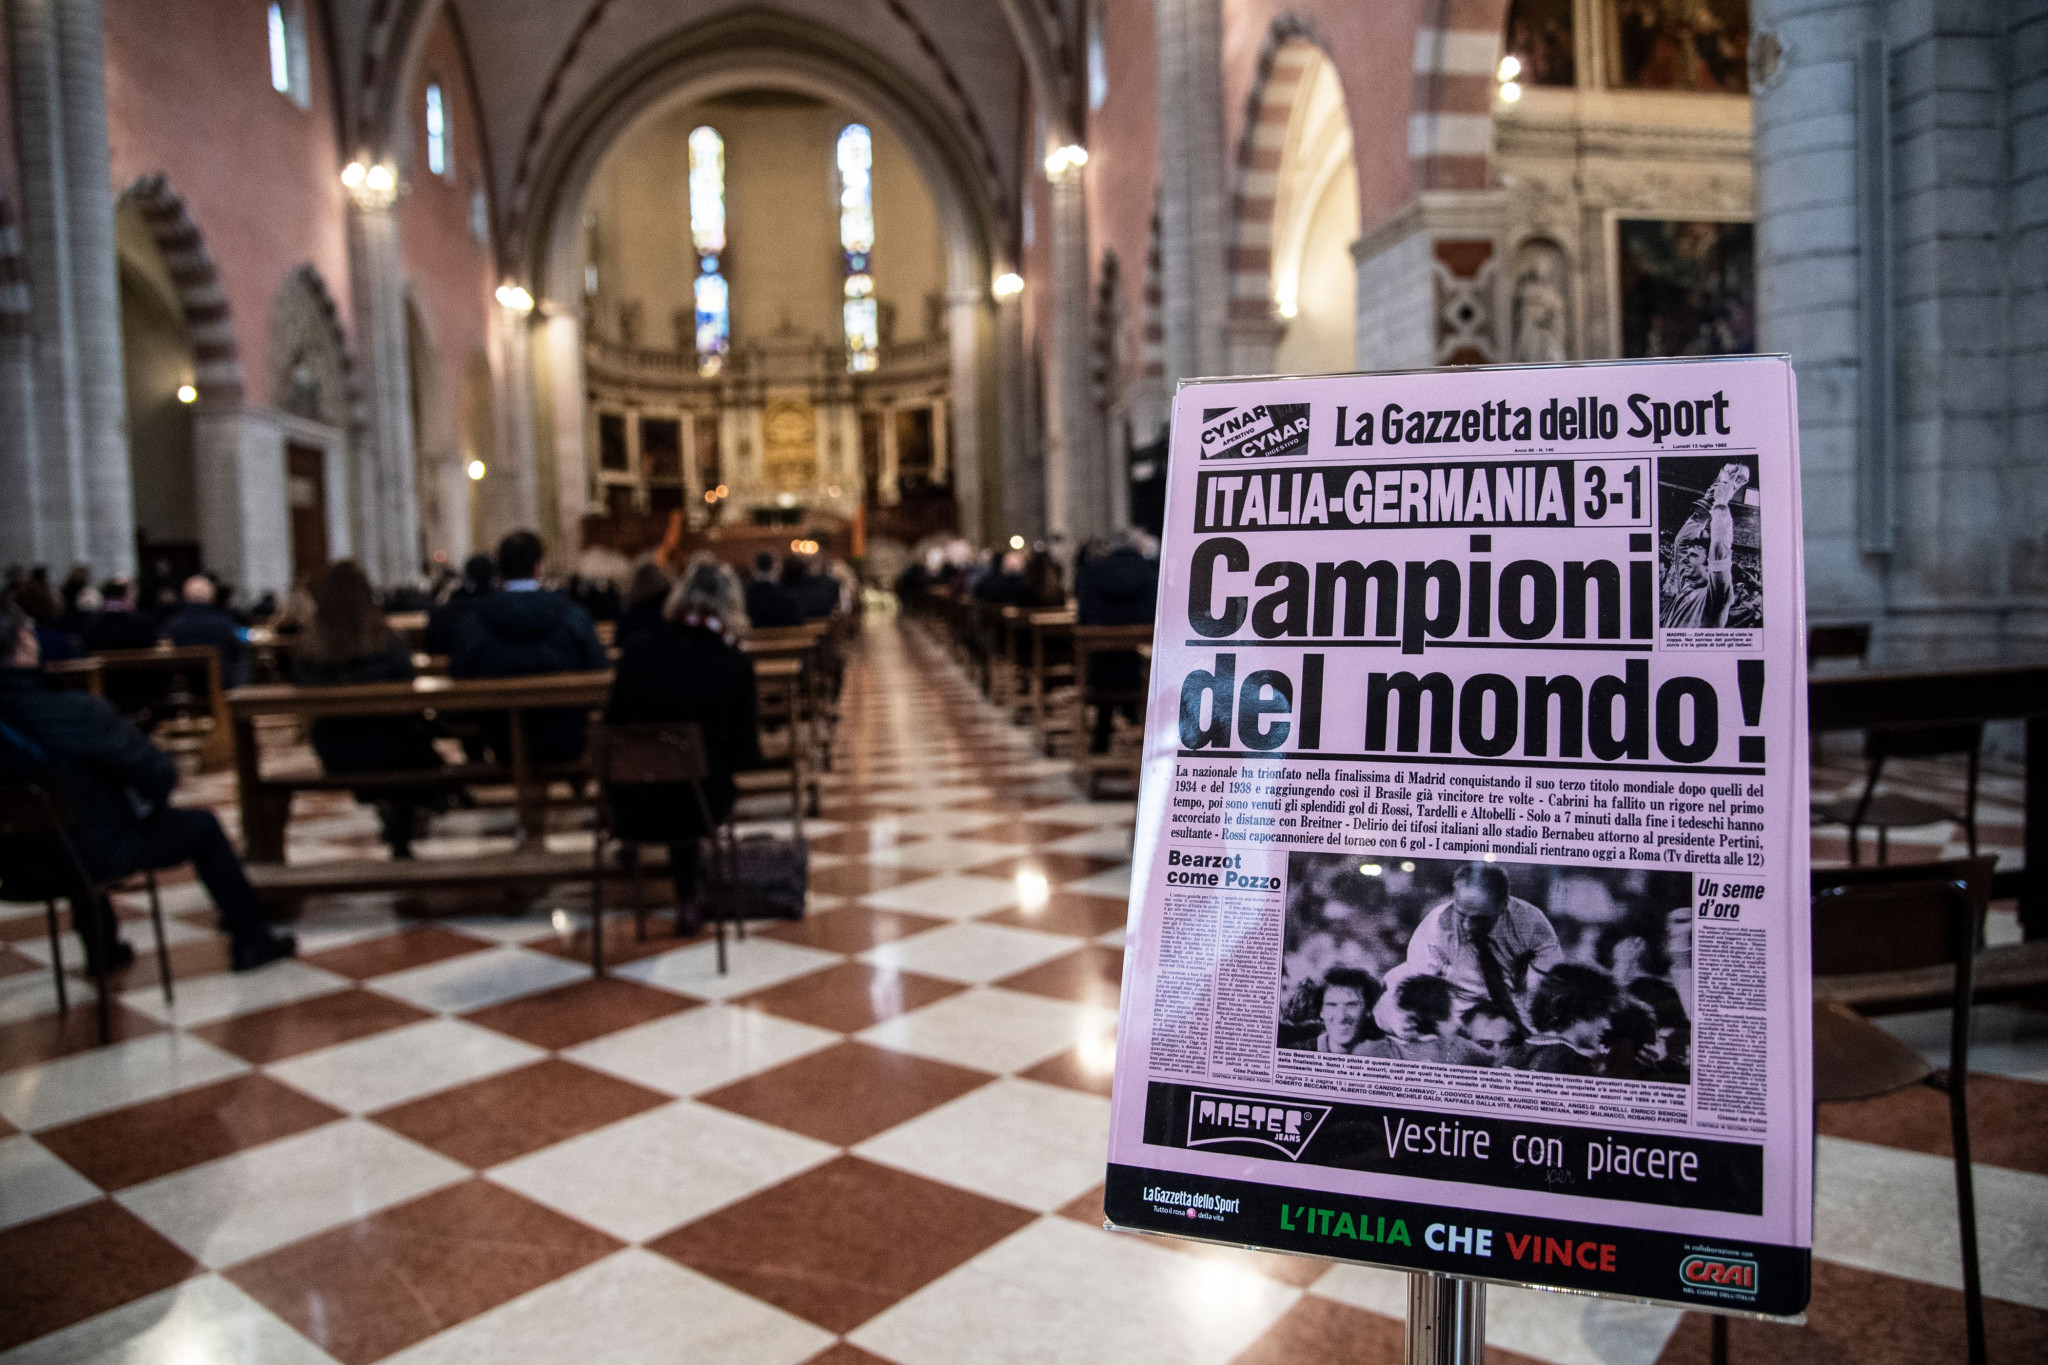 A newspaper front page was displayed at Paolo Rossi's funeral earlier this year ©Getty Images